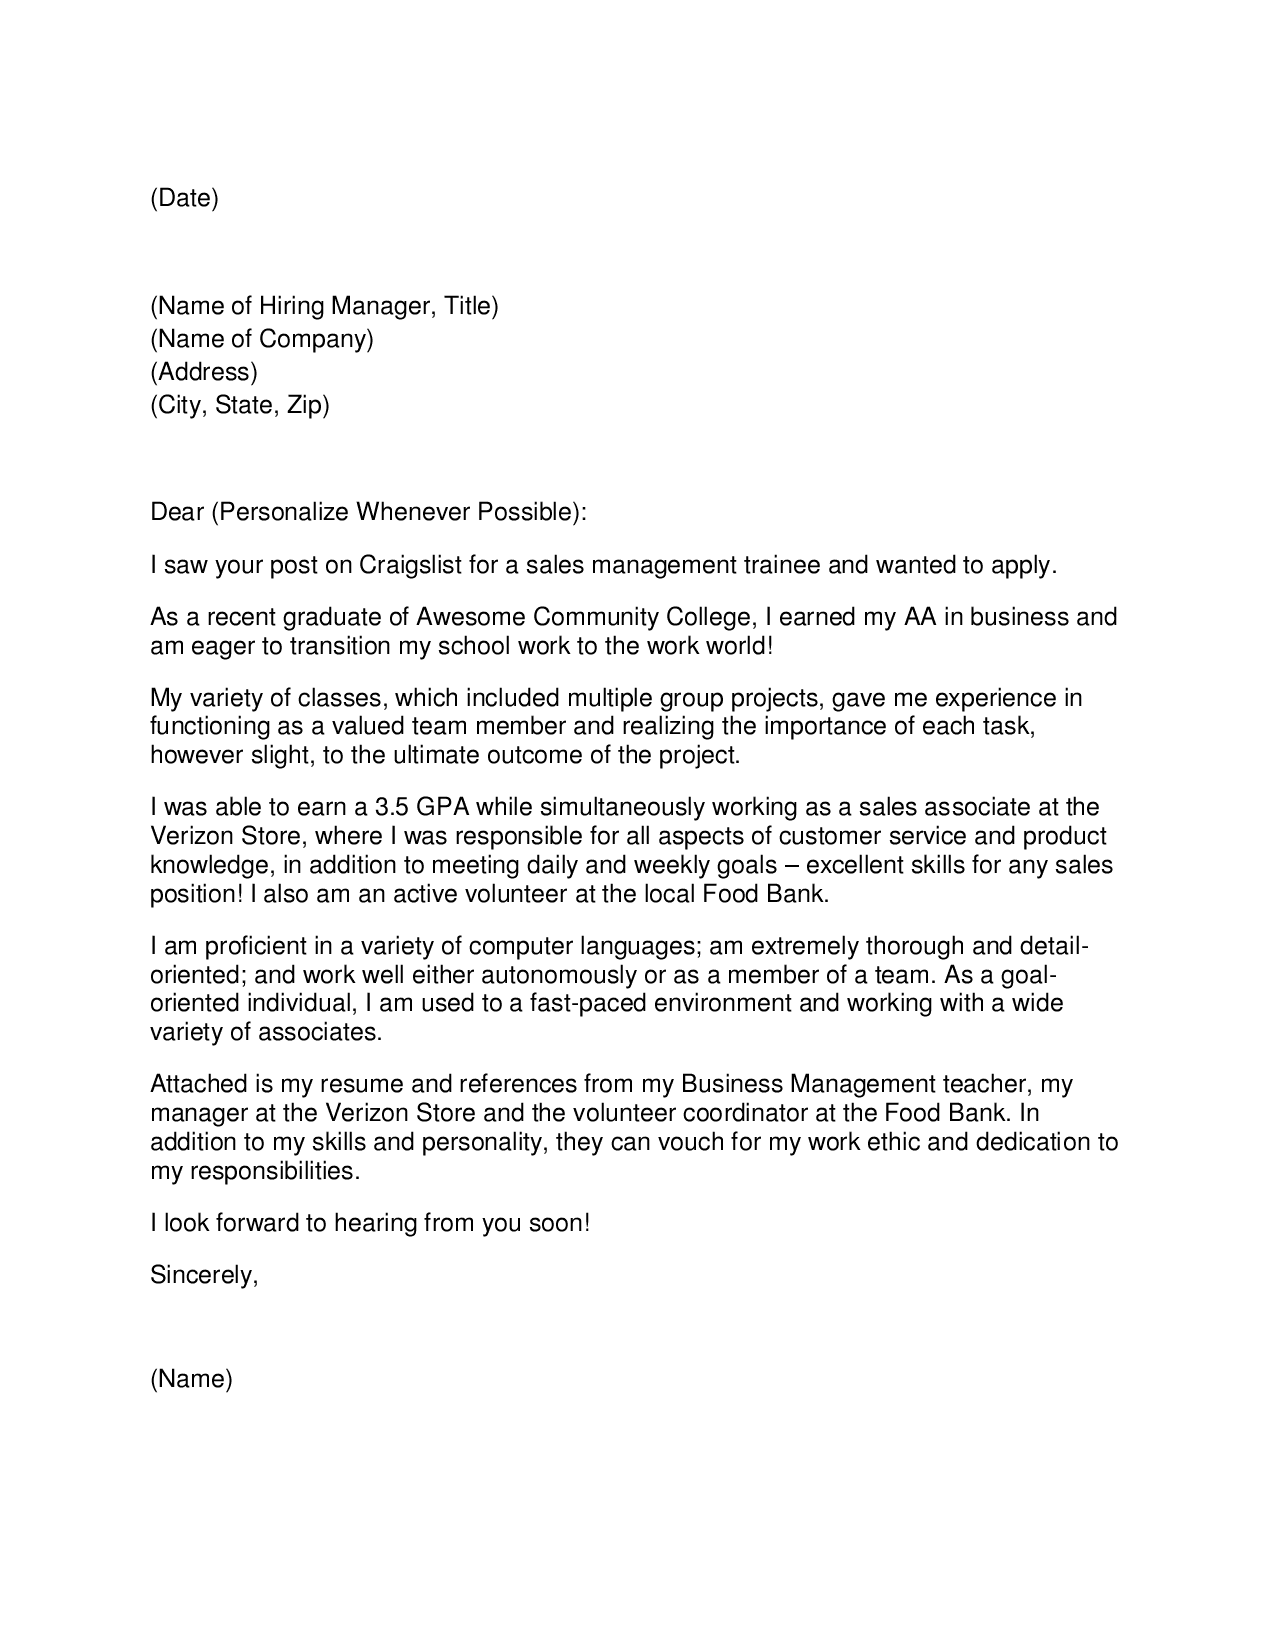 Sample cover letter in germany